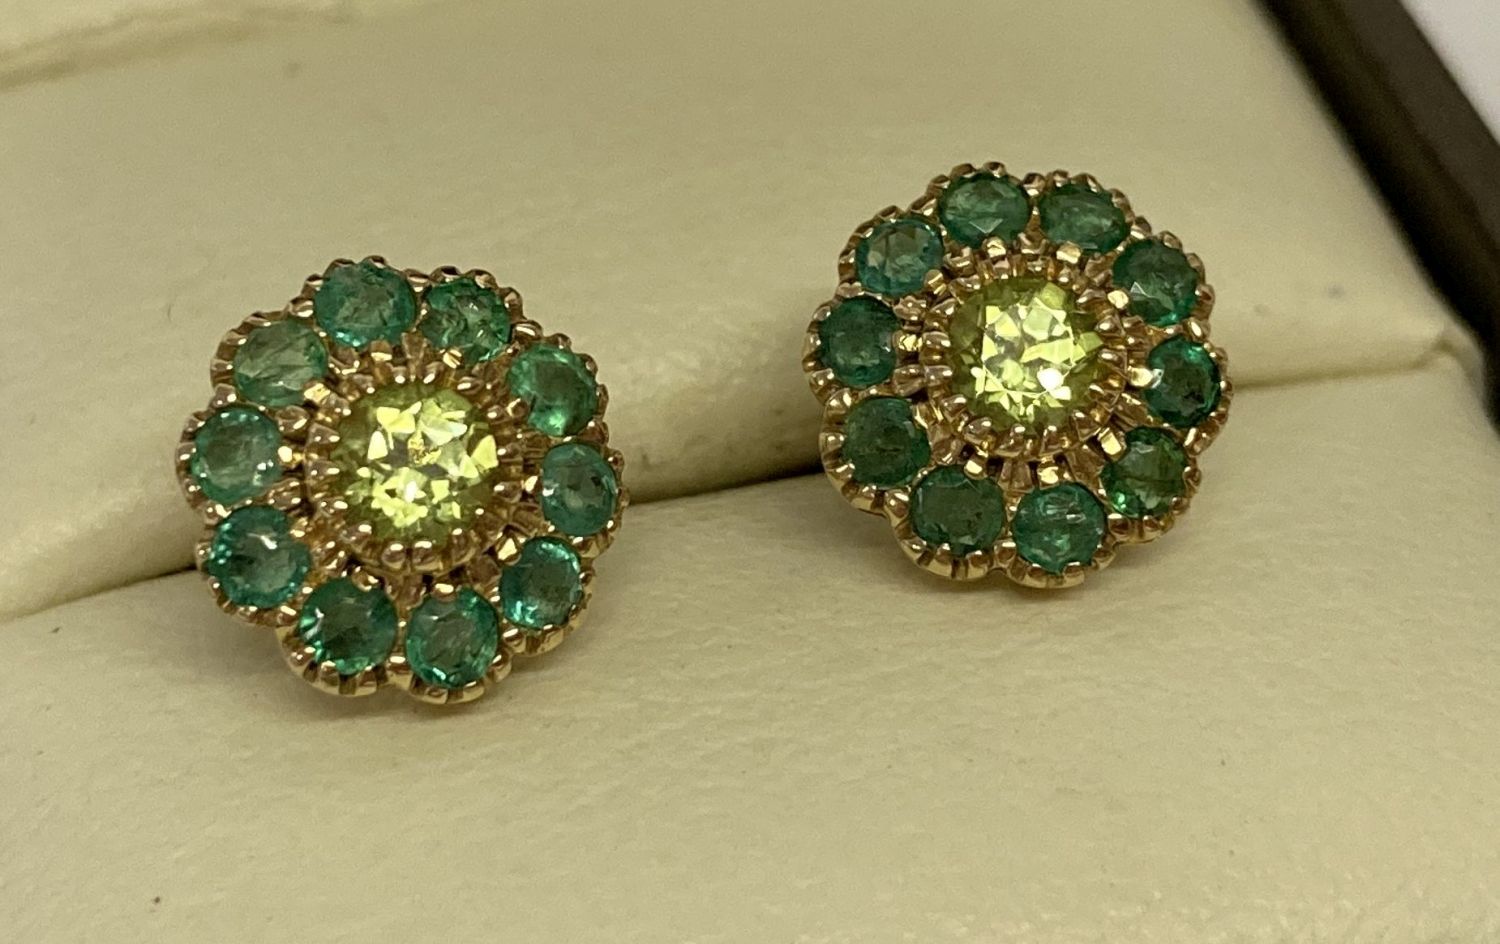 A pair of 9ct gold, emerald and peridot cluster stud earrings by Luke Stockley.